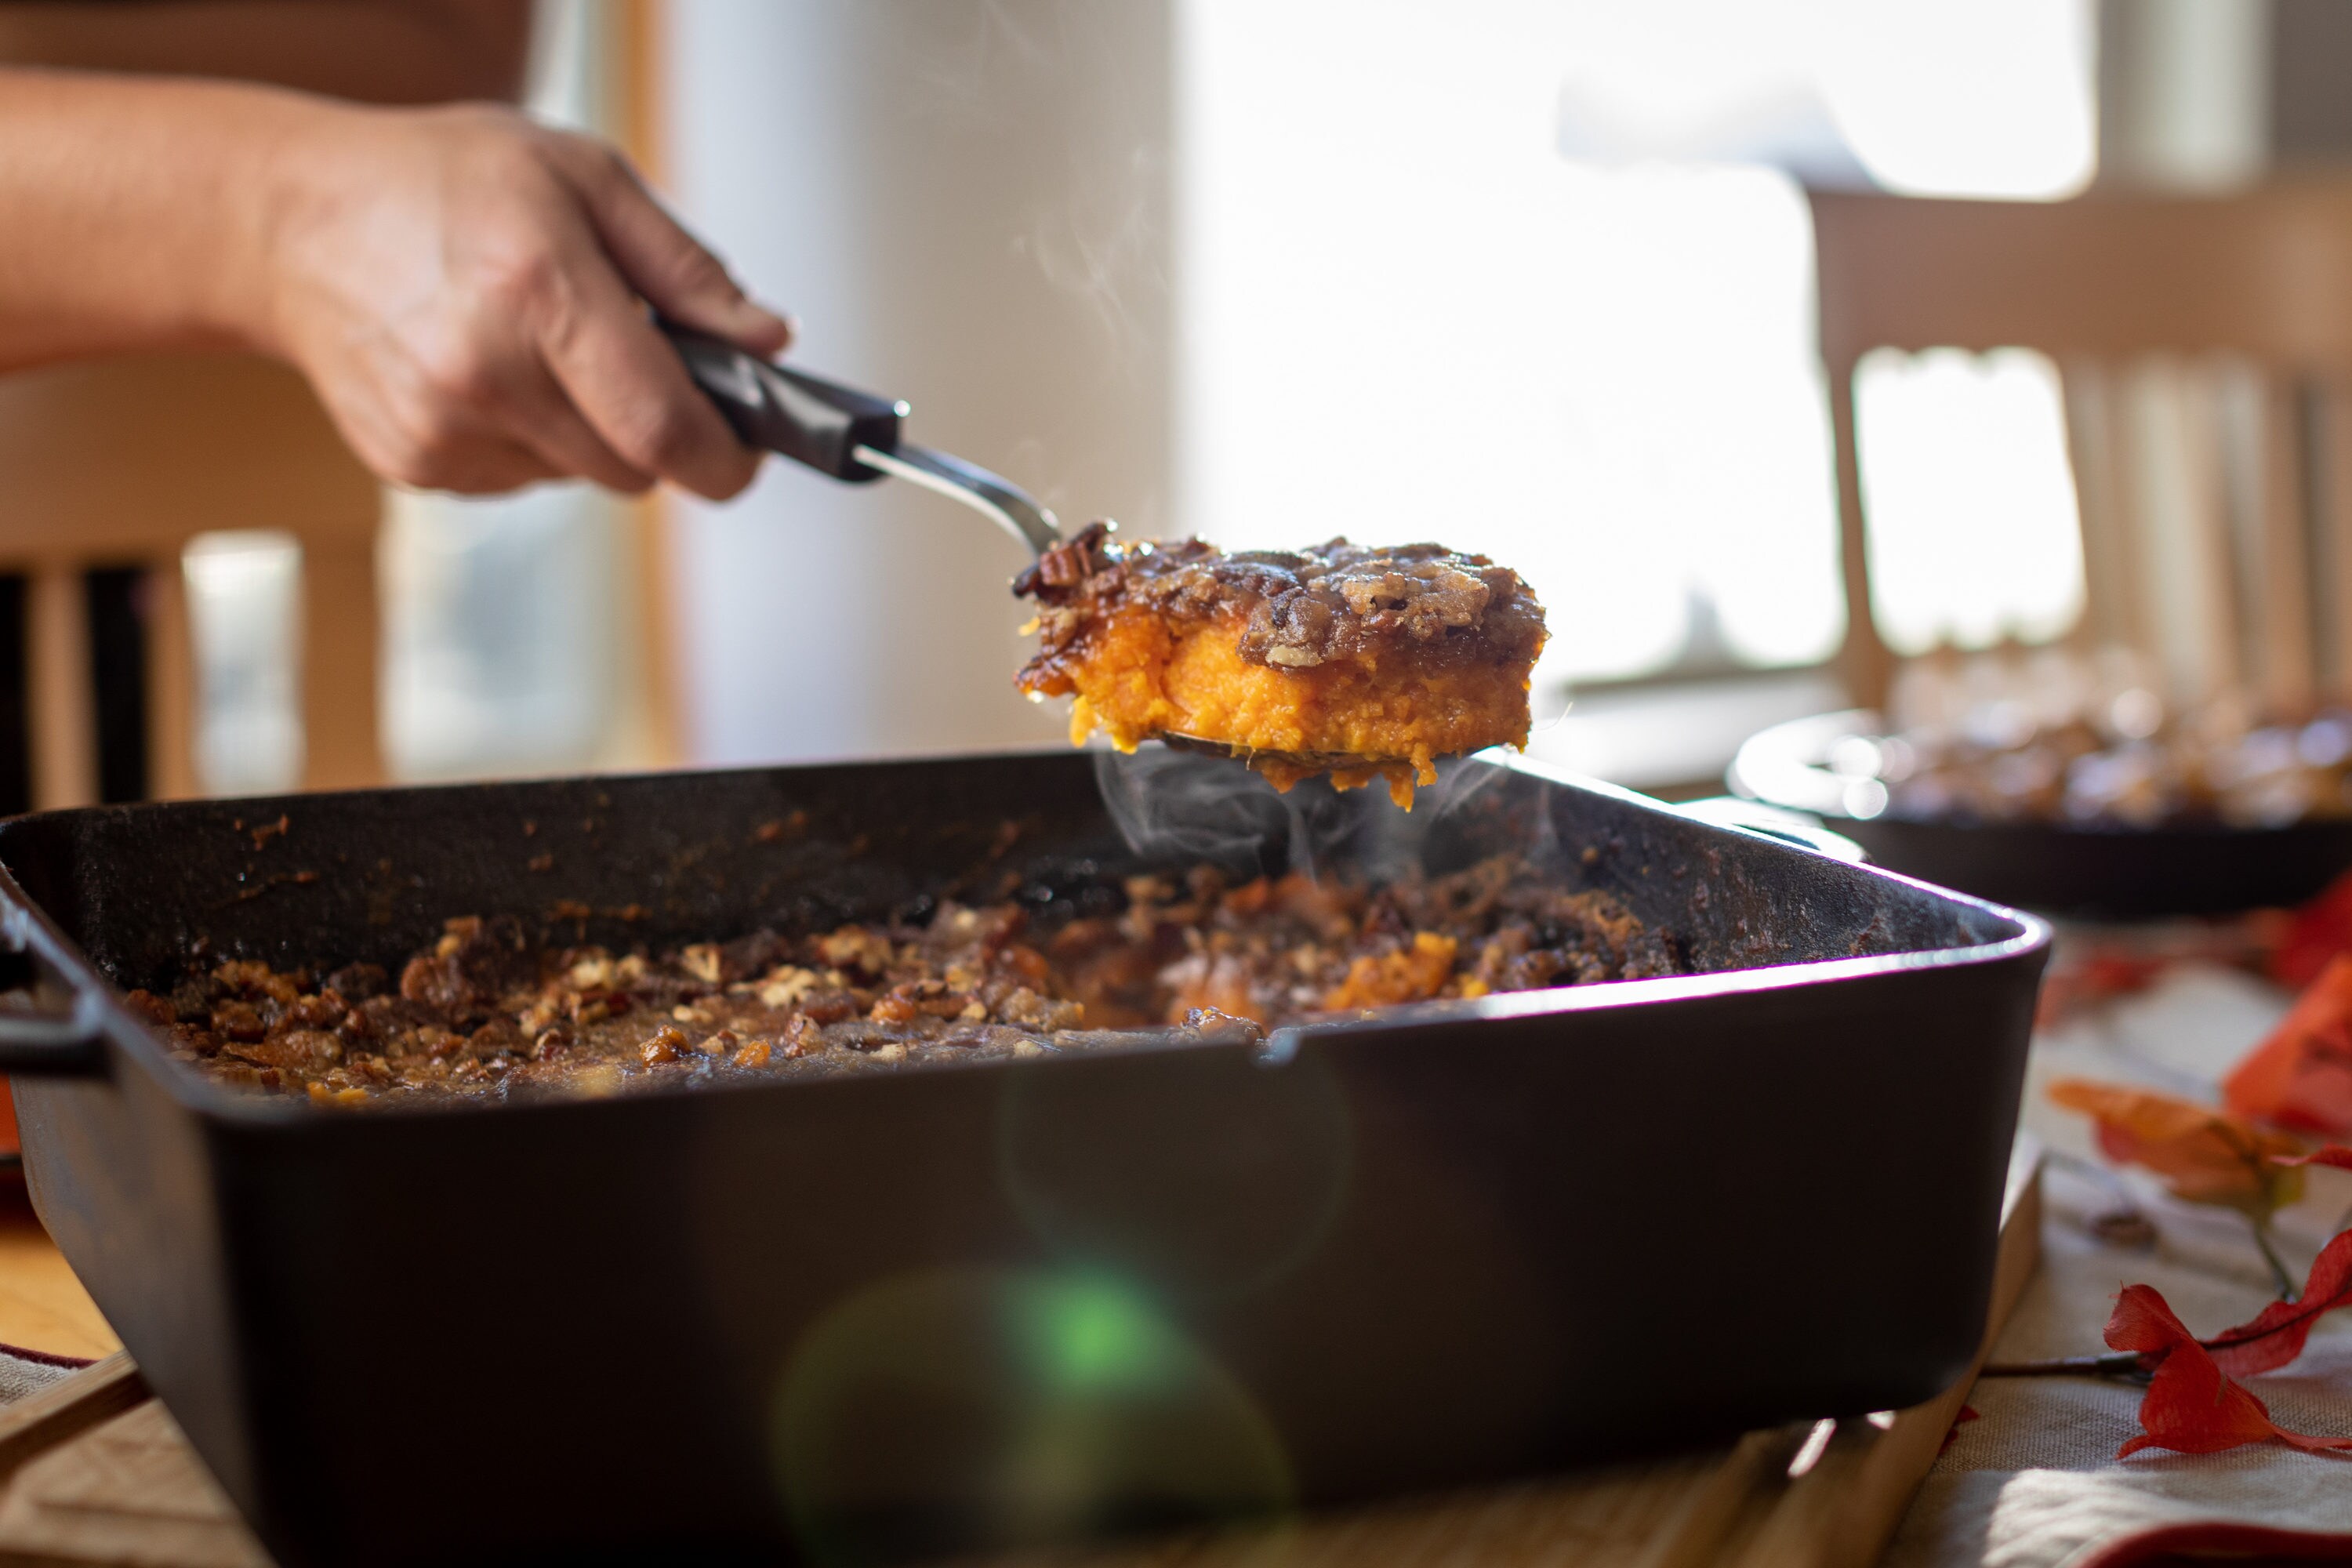 Chef Collection Square Grill Pan | Lodge Cast Iron